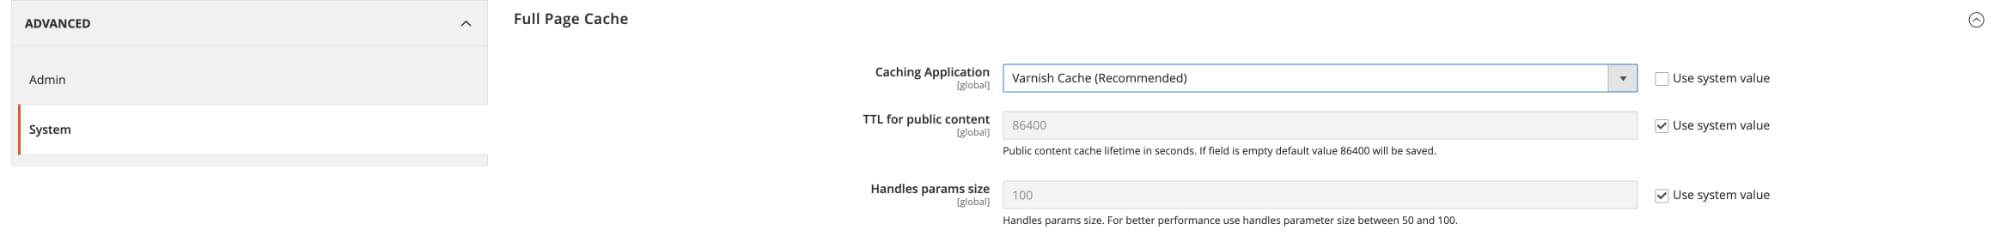 Caching Application